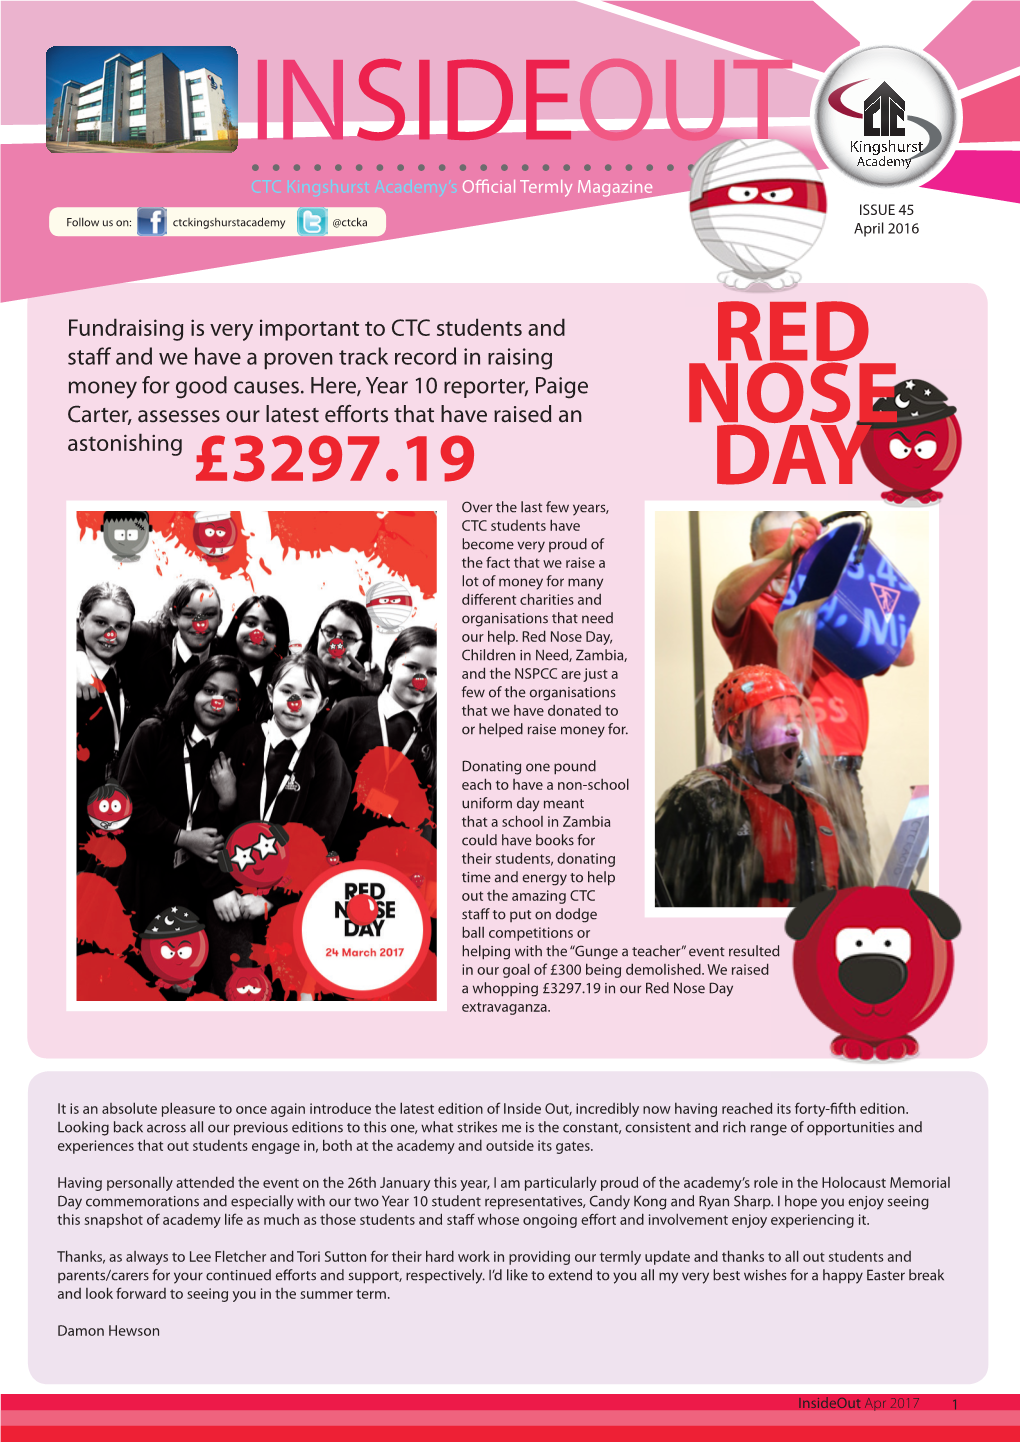 Red Nose Day, Children in Need, Zambia, and the NSPCC Are Just a Few of the Organisations That We Have Donated to Or Helped Raise Money For